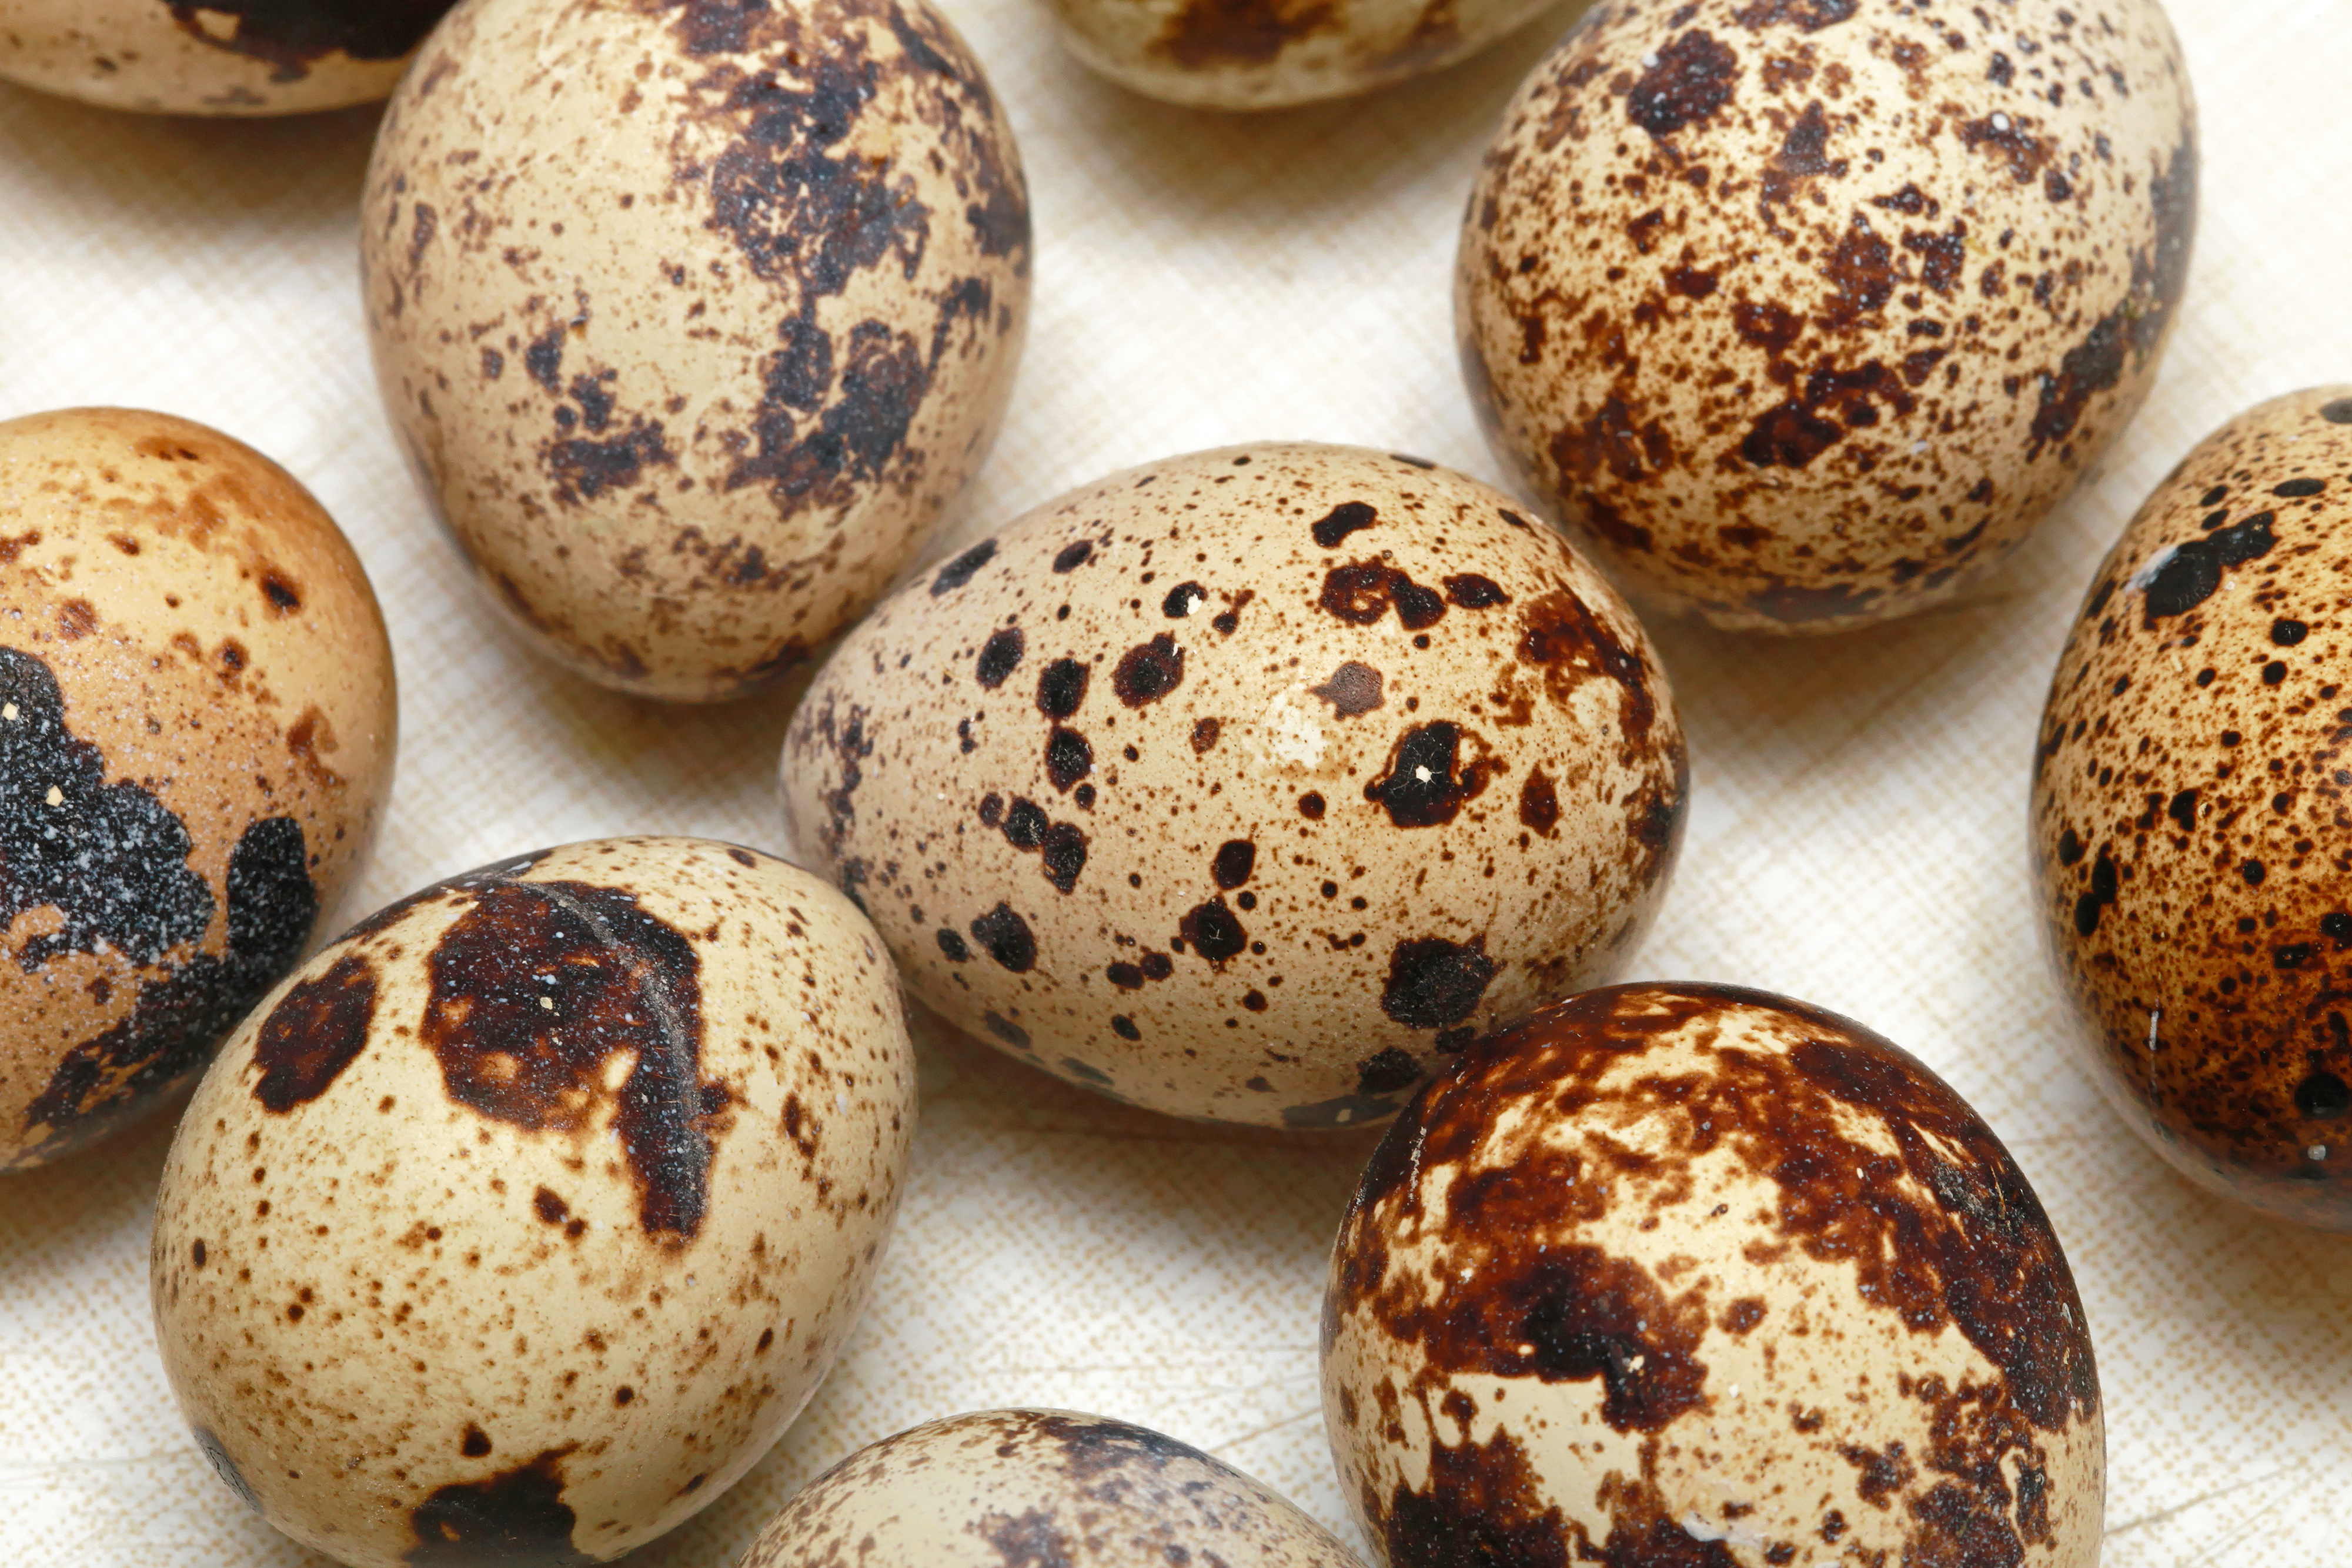 Quails produce an average of one egg per day